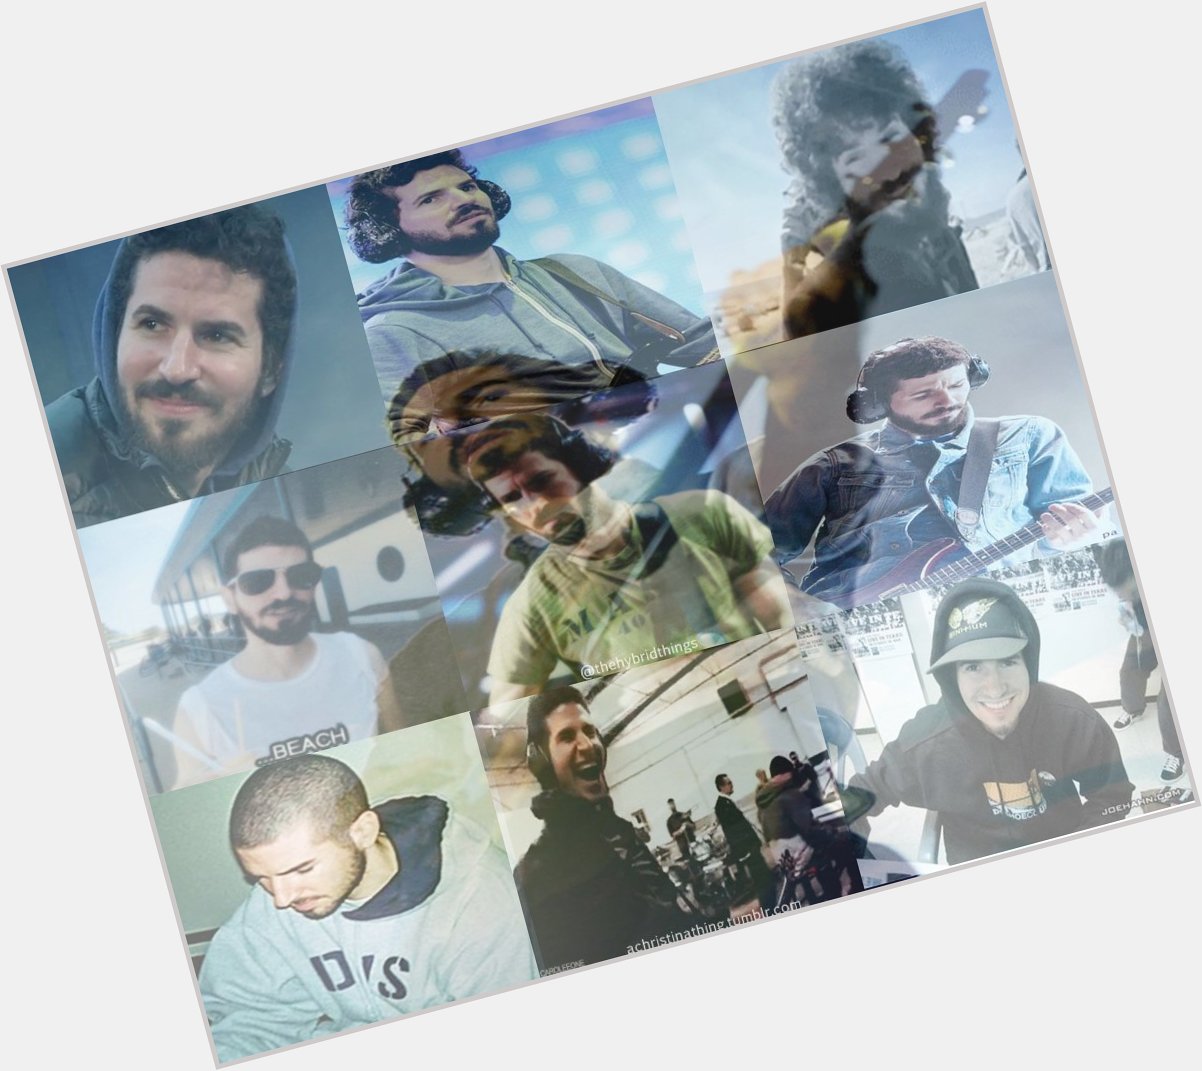 Happy Birthday to one of my favorite people ever and to a super awesome guitarist, Brad Delson. Love you so much. 